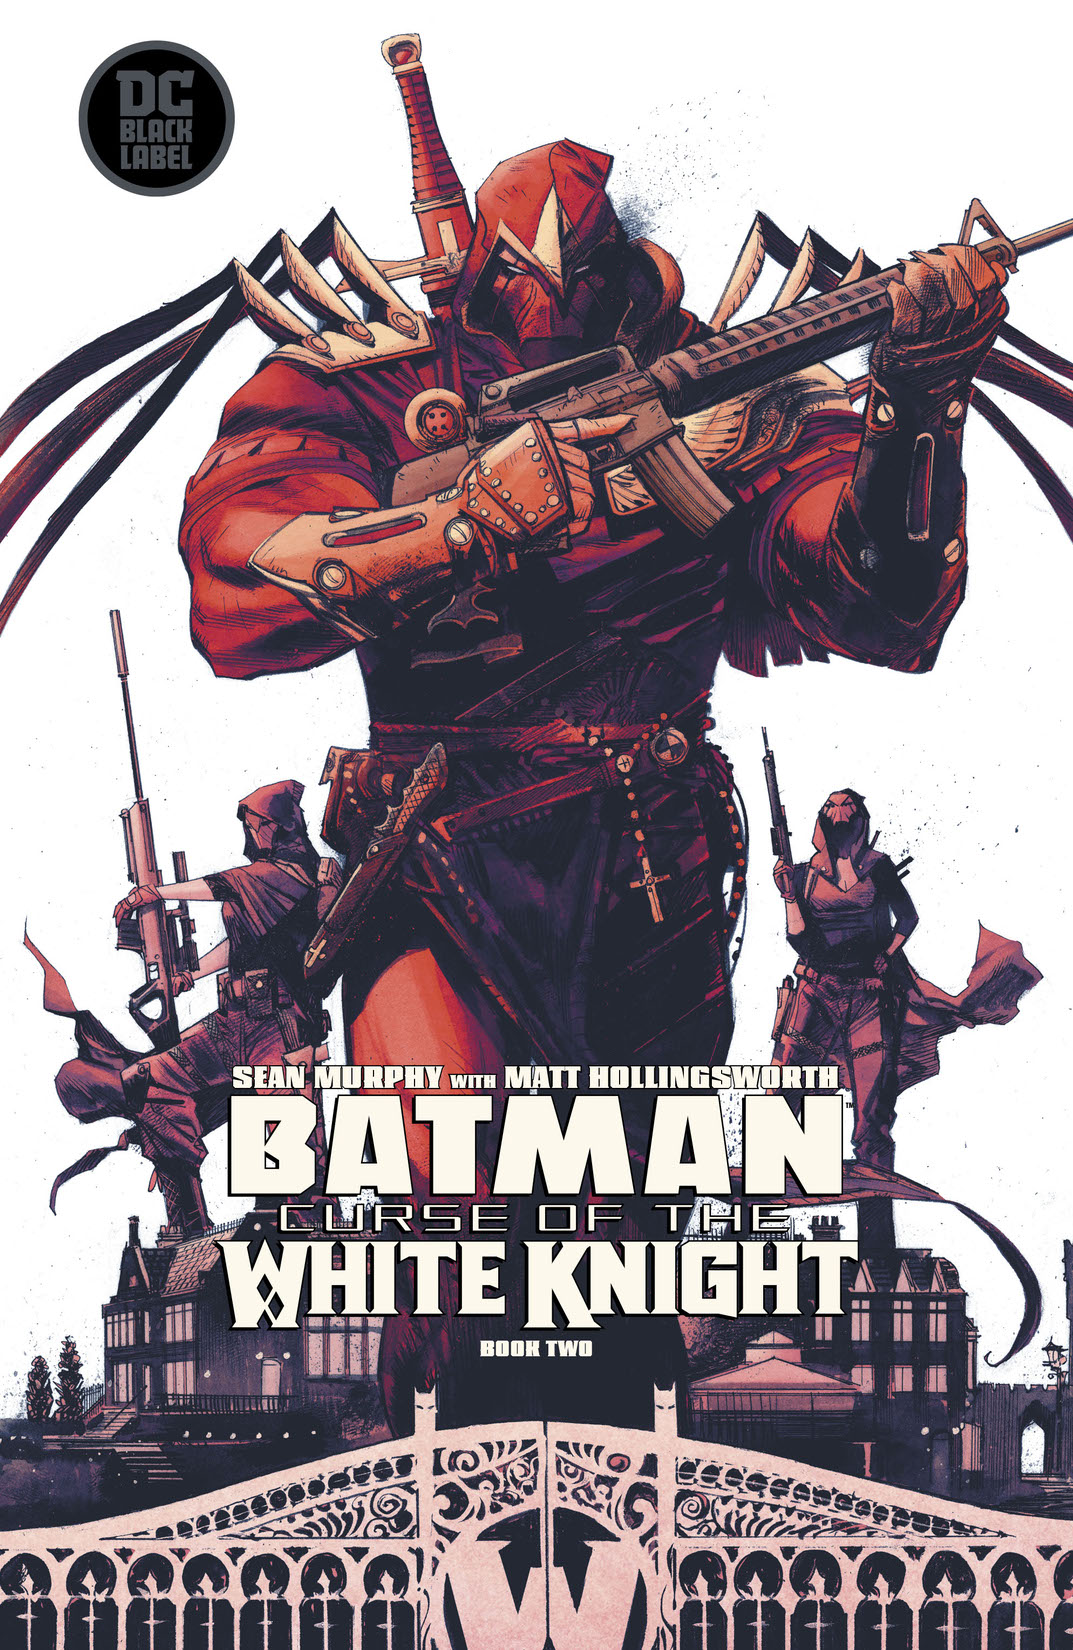 Batman: Curse of the White Knight #2 preview images